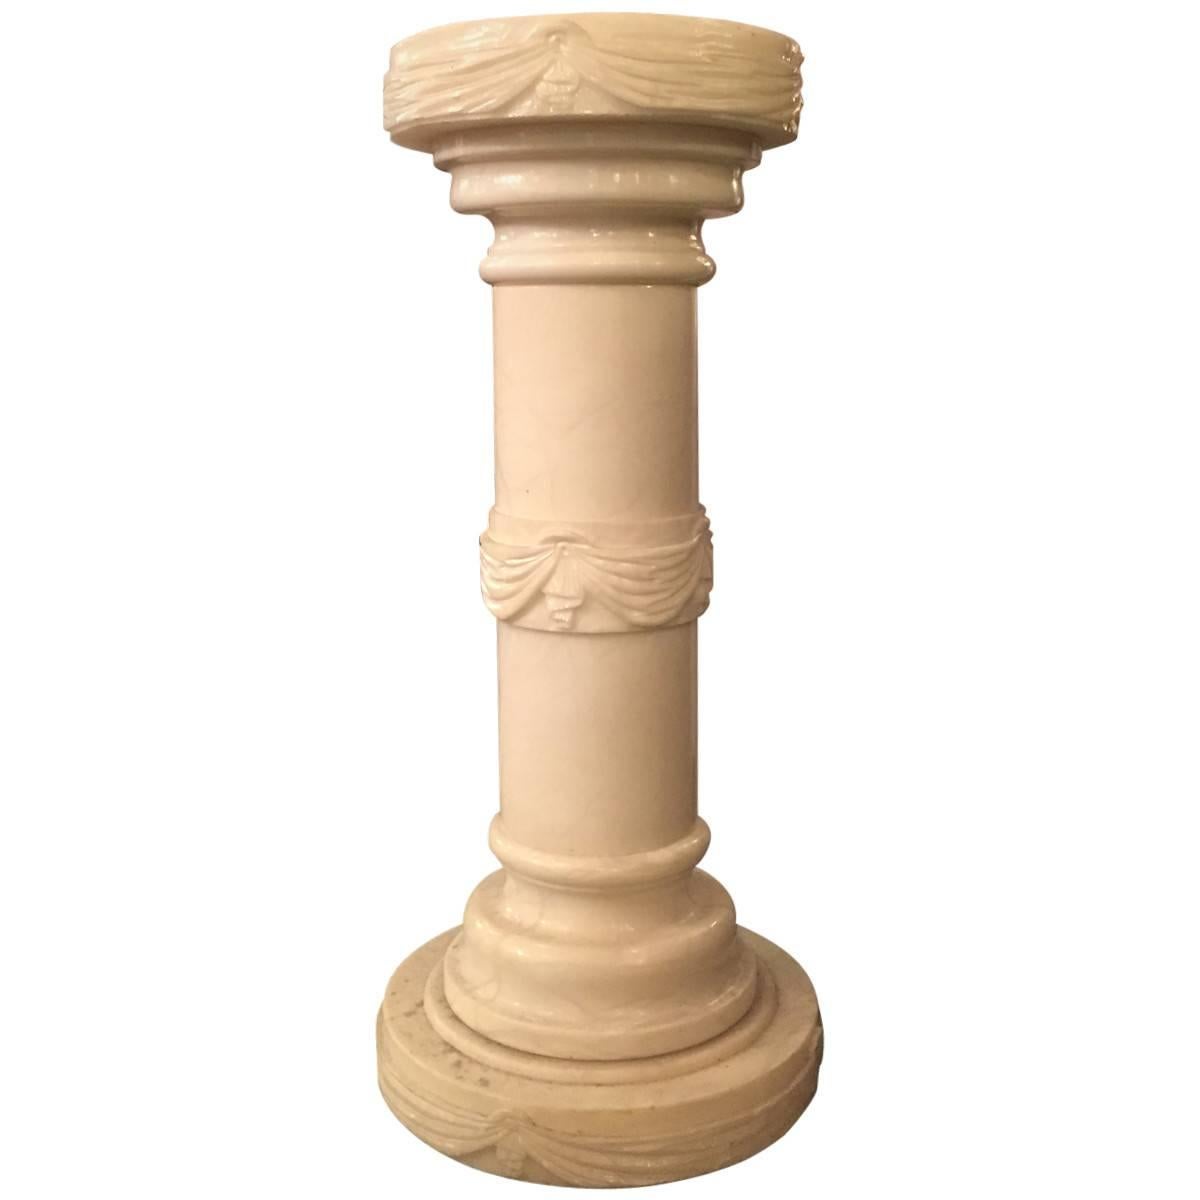 This unique pair of vintage lighting makes a bold and delightful decorative accent. The two alabaster pedestals, decorated with draped ribbon detailing, are illuminated from within the column.
Sold as a set of two.
Measures: Width 12